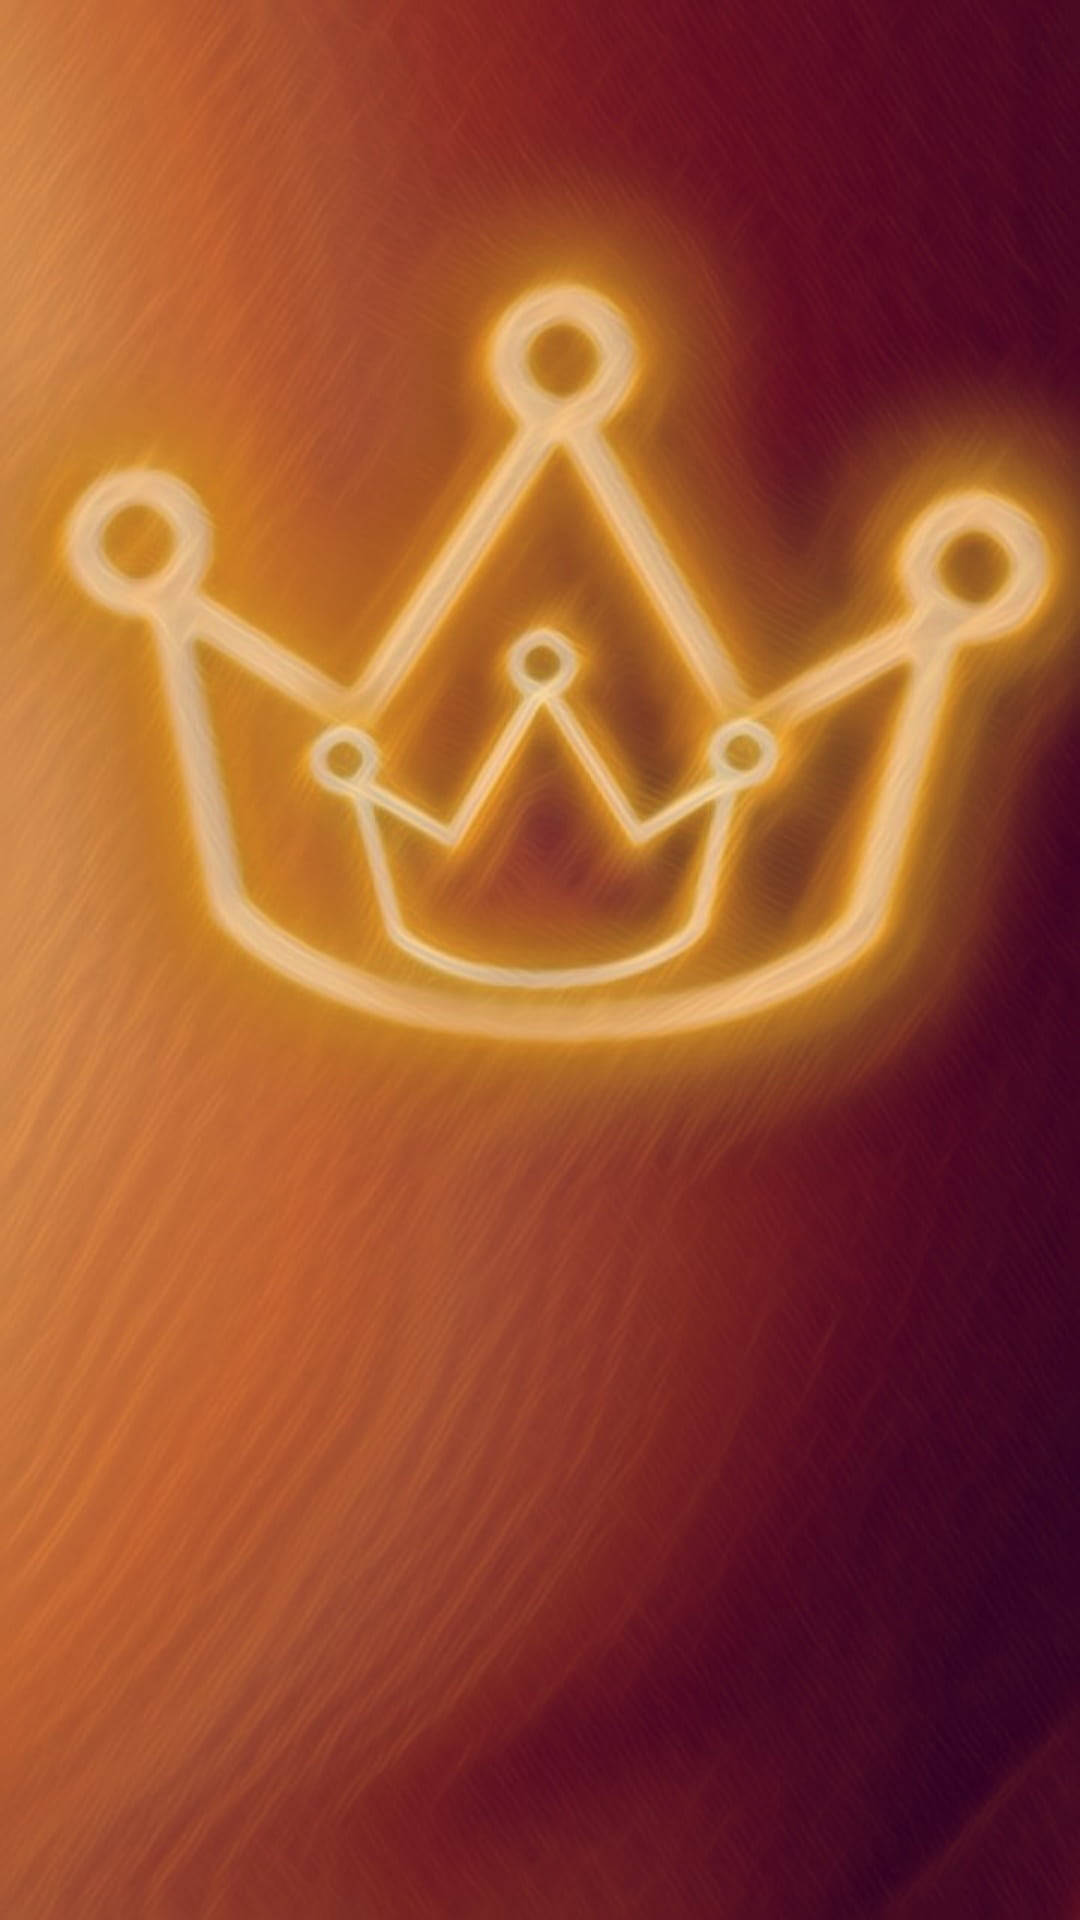 Double Crowns King Iphone Wallpaper